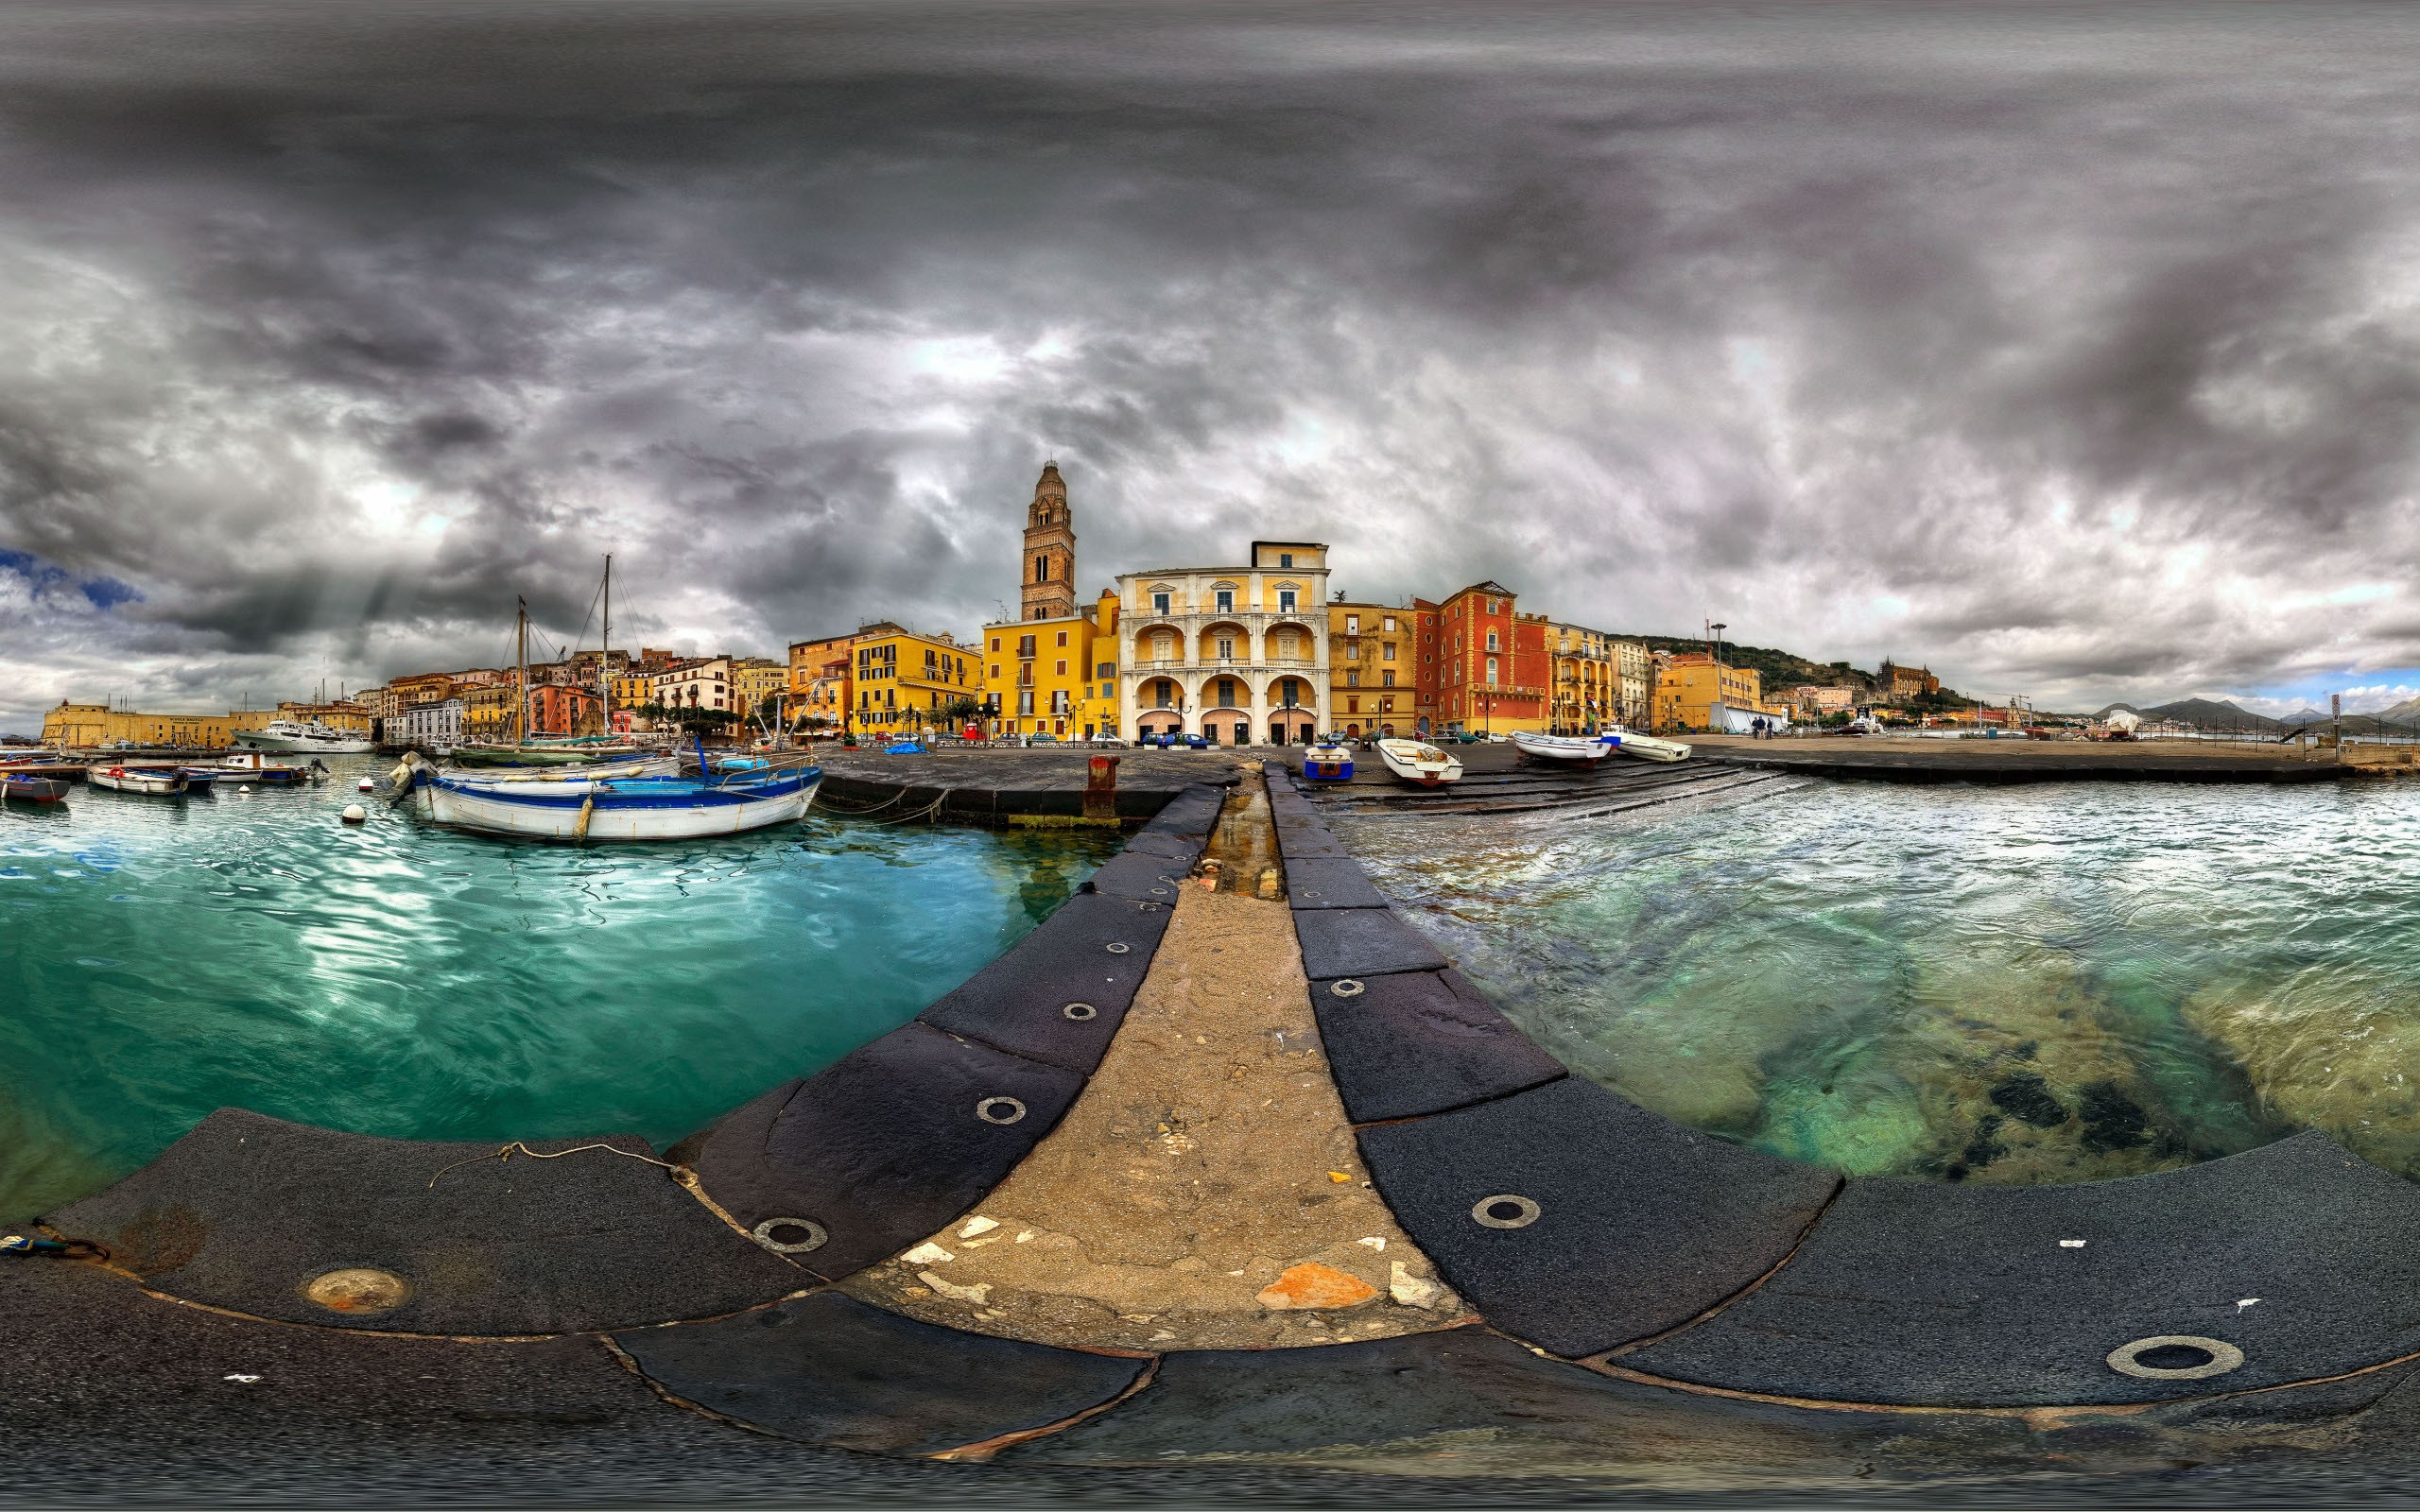 General 2560x1600 cityscape city sky boat fisheye lens water clouds HDR Italy Venice